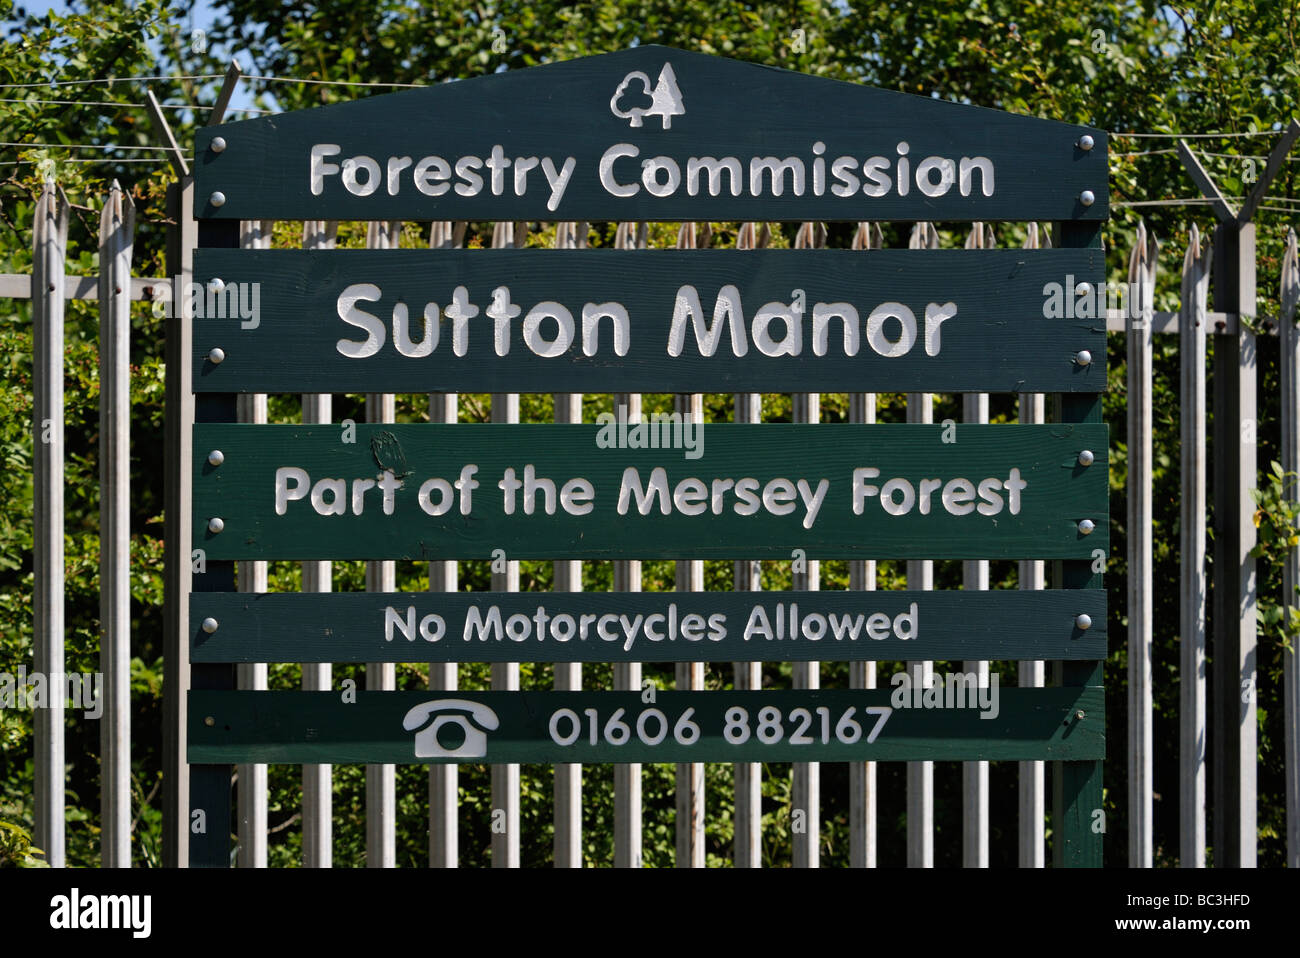 Forestry Commission signboard. Sutton Manor, Mersey Forest, St.Helens, Merseyside, England, United Kingdom, Europe. Stock Photo